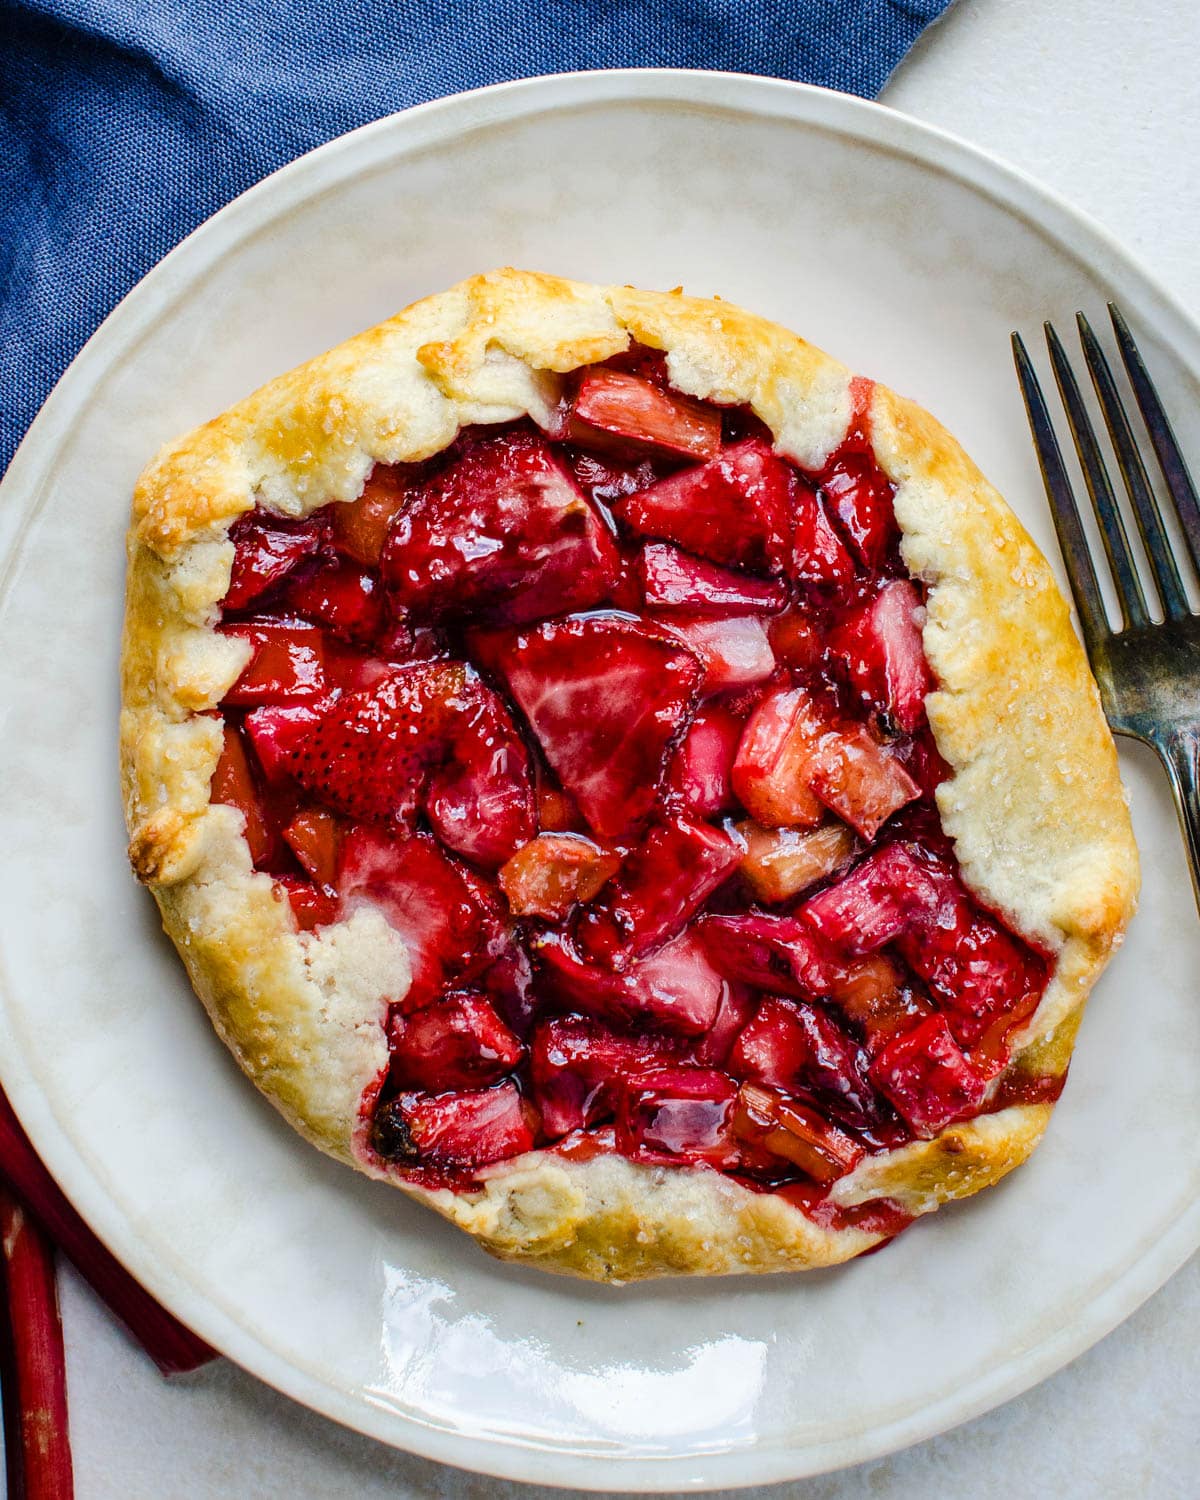 Serving the strawberry rhubarb galette.